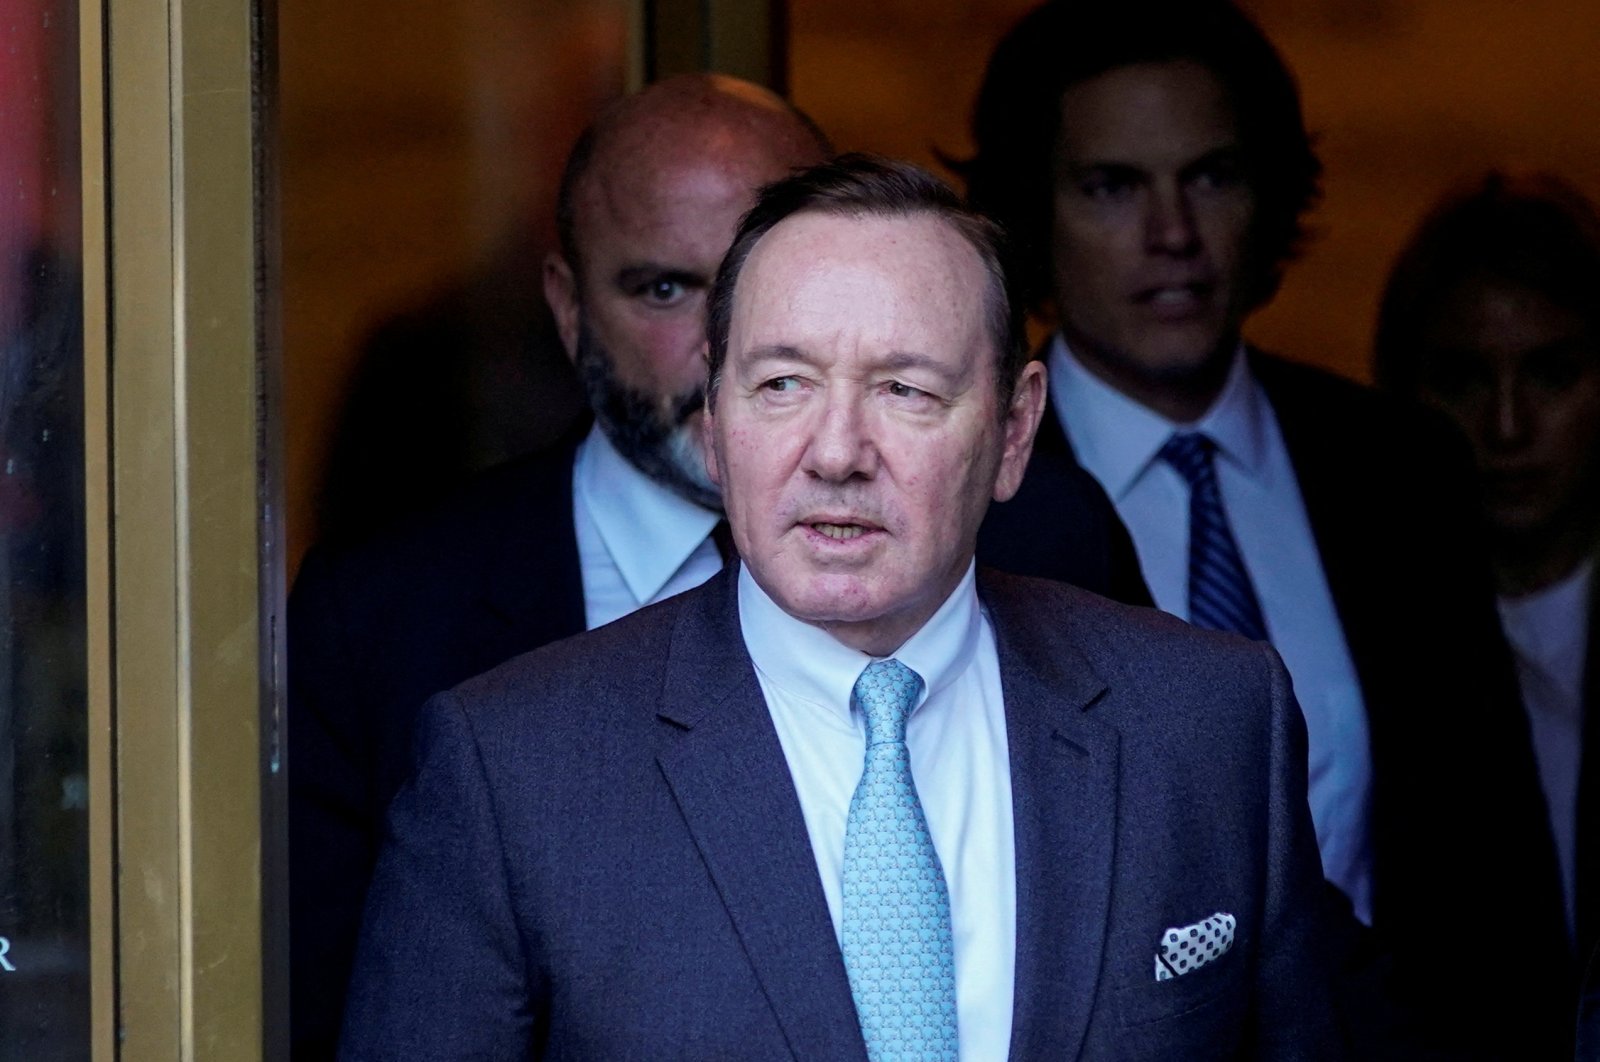 Actor Kevin Spacey exits the Manhattan Federal Court during his sexual abuse trial in New York, U.S., Oct. 6, 2022. (Reuters Photo)